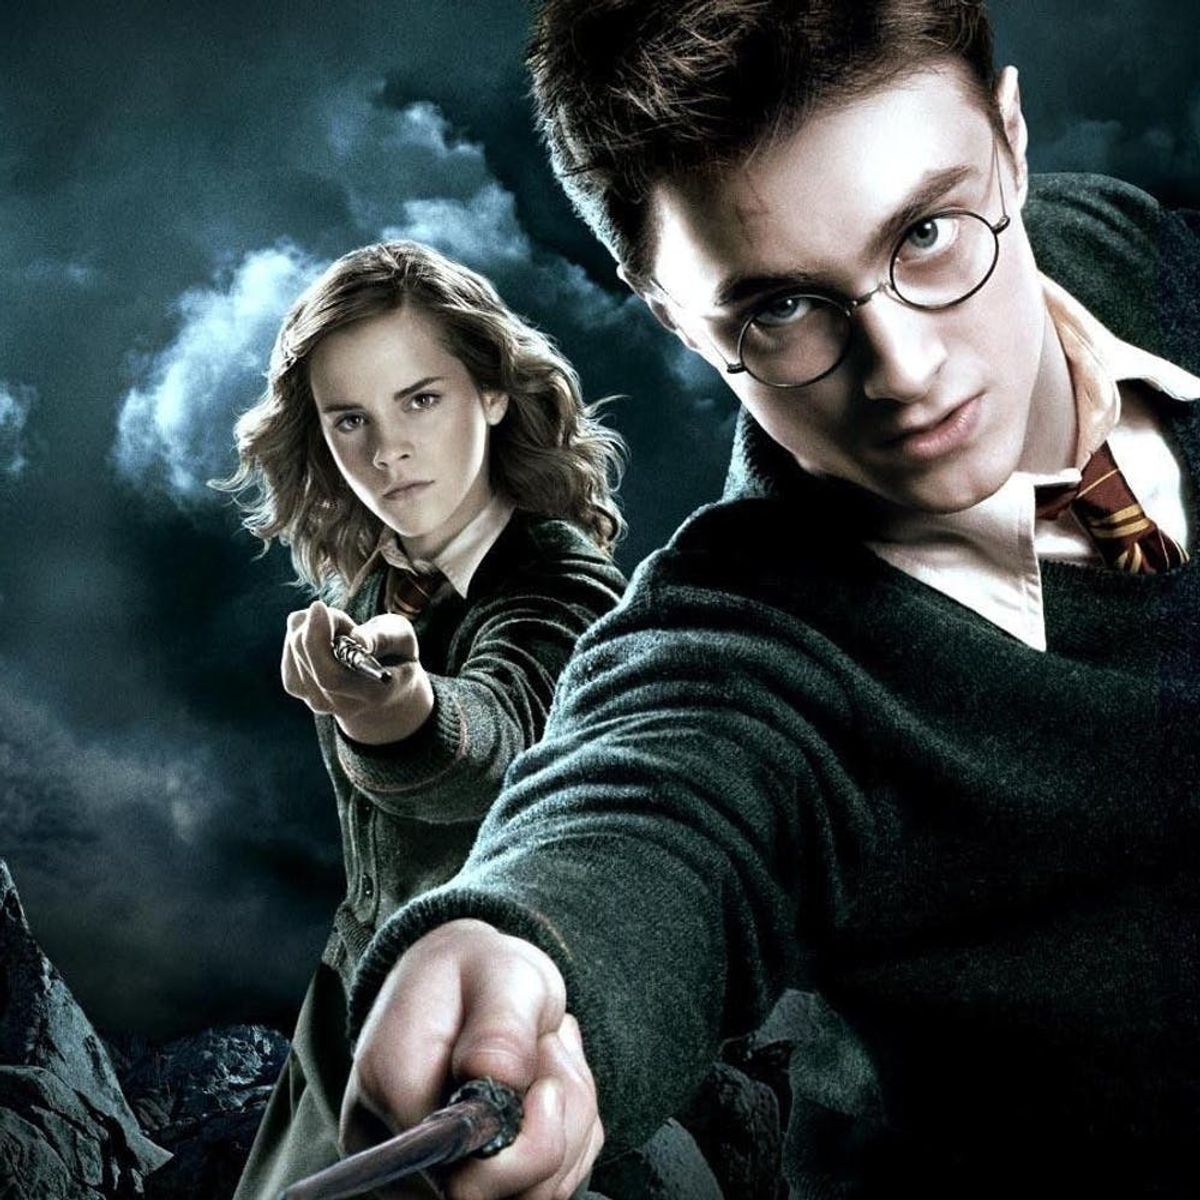 This Is How You Can Cast IRL Harry Potter Spells With Your Phone